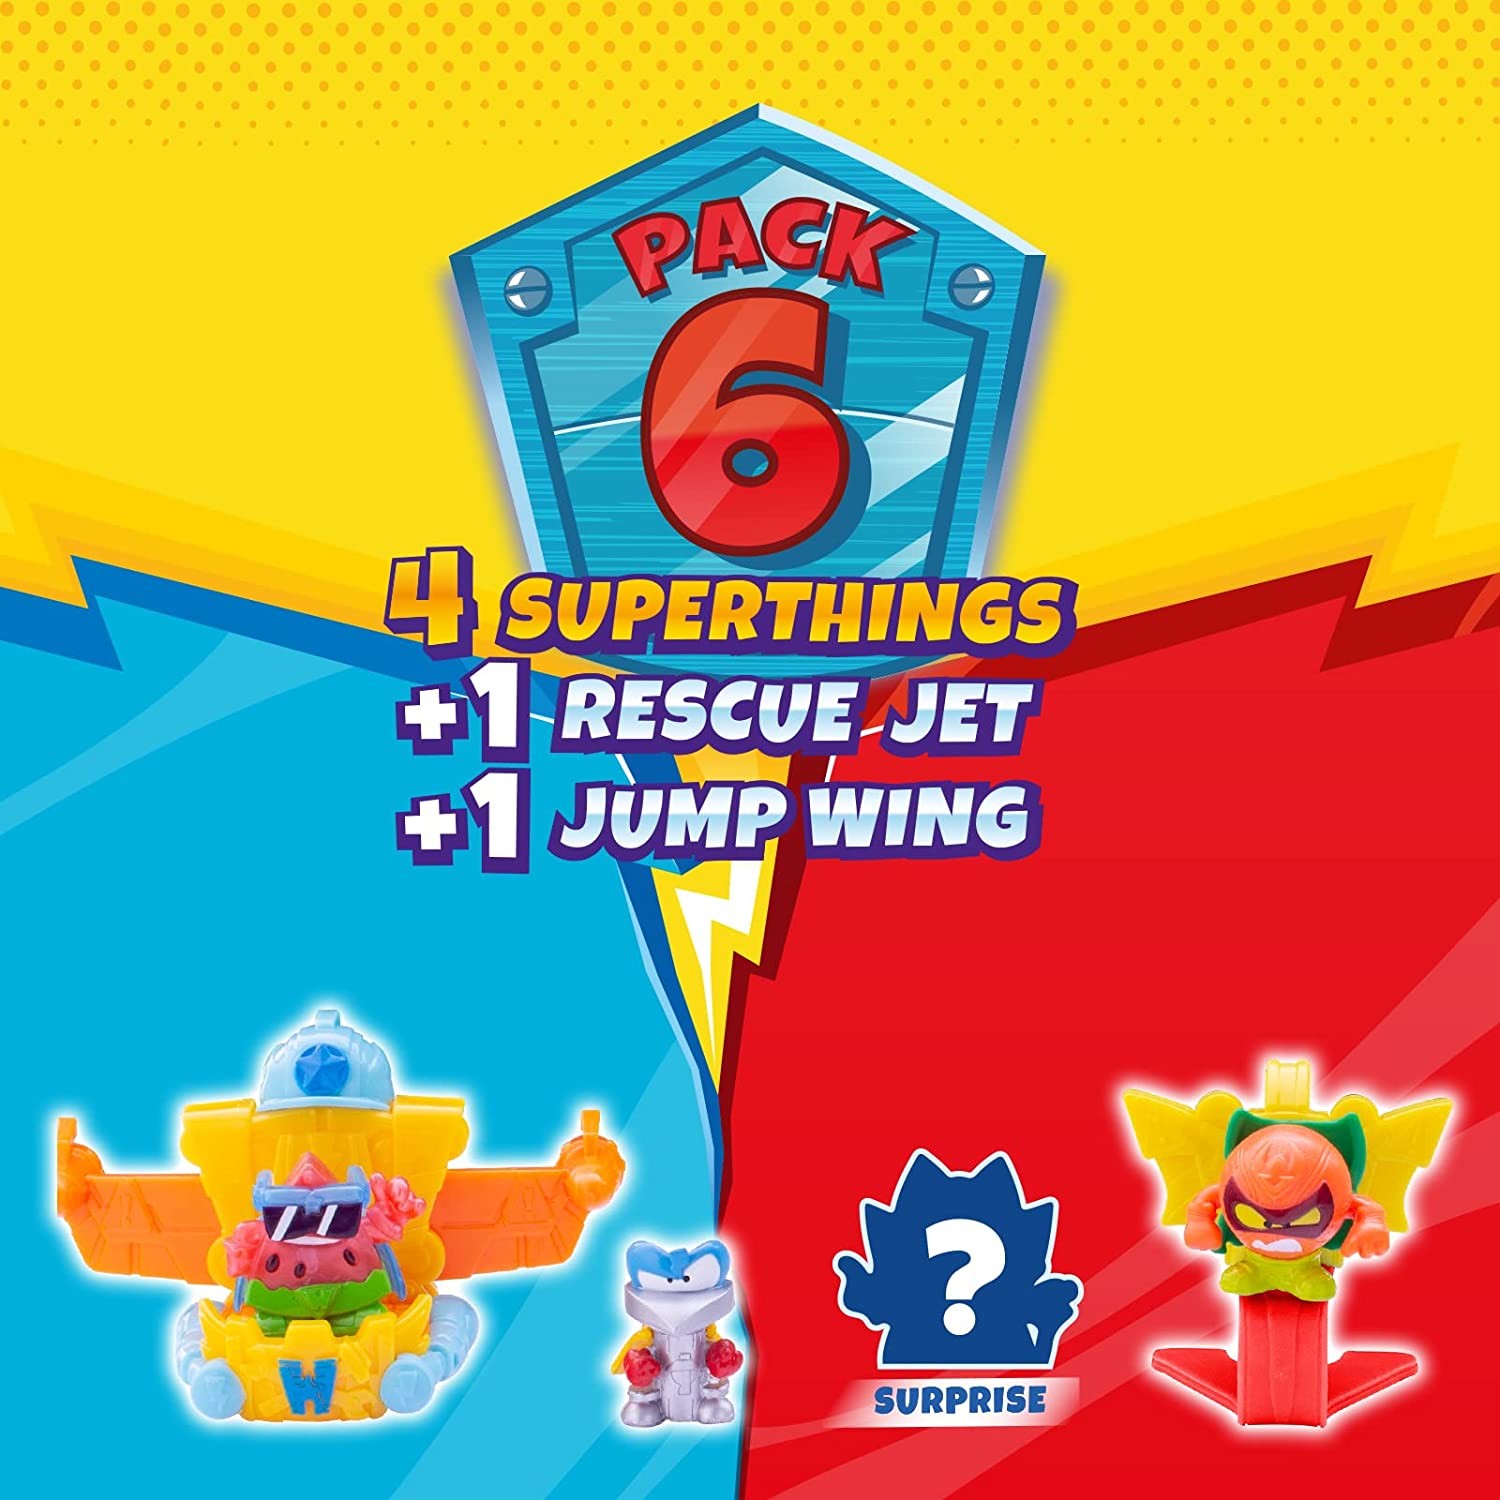 SUPERTHINGS Rescue Force Series – 6-Pack. Includes 4 SuperThings (1 rare silver captain), 1 Rescue Jet and 1 Jump Wing 5/6 - Agenda Bookshop